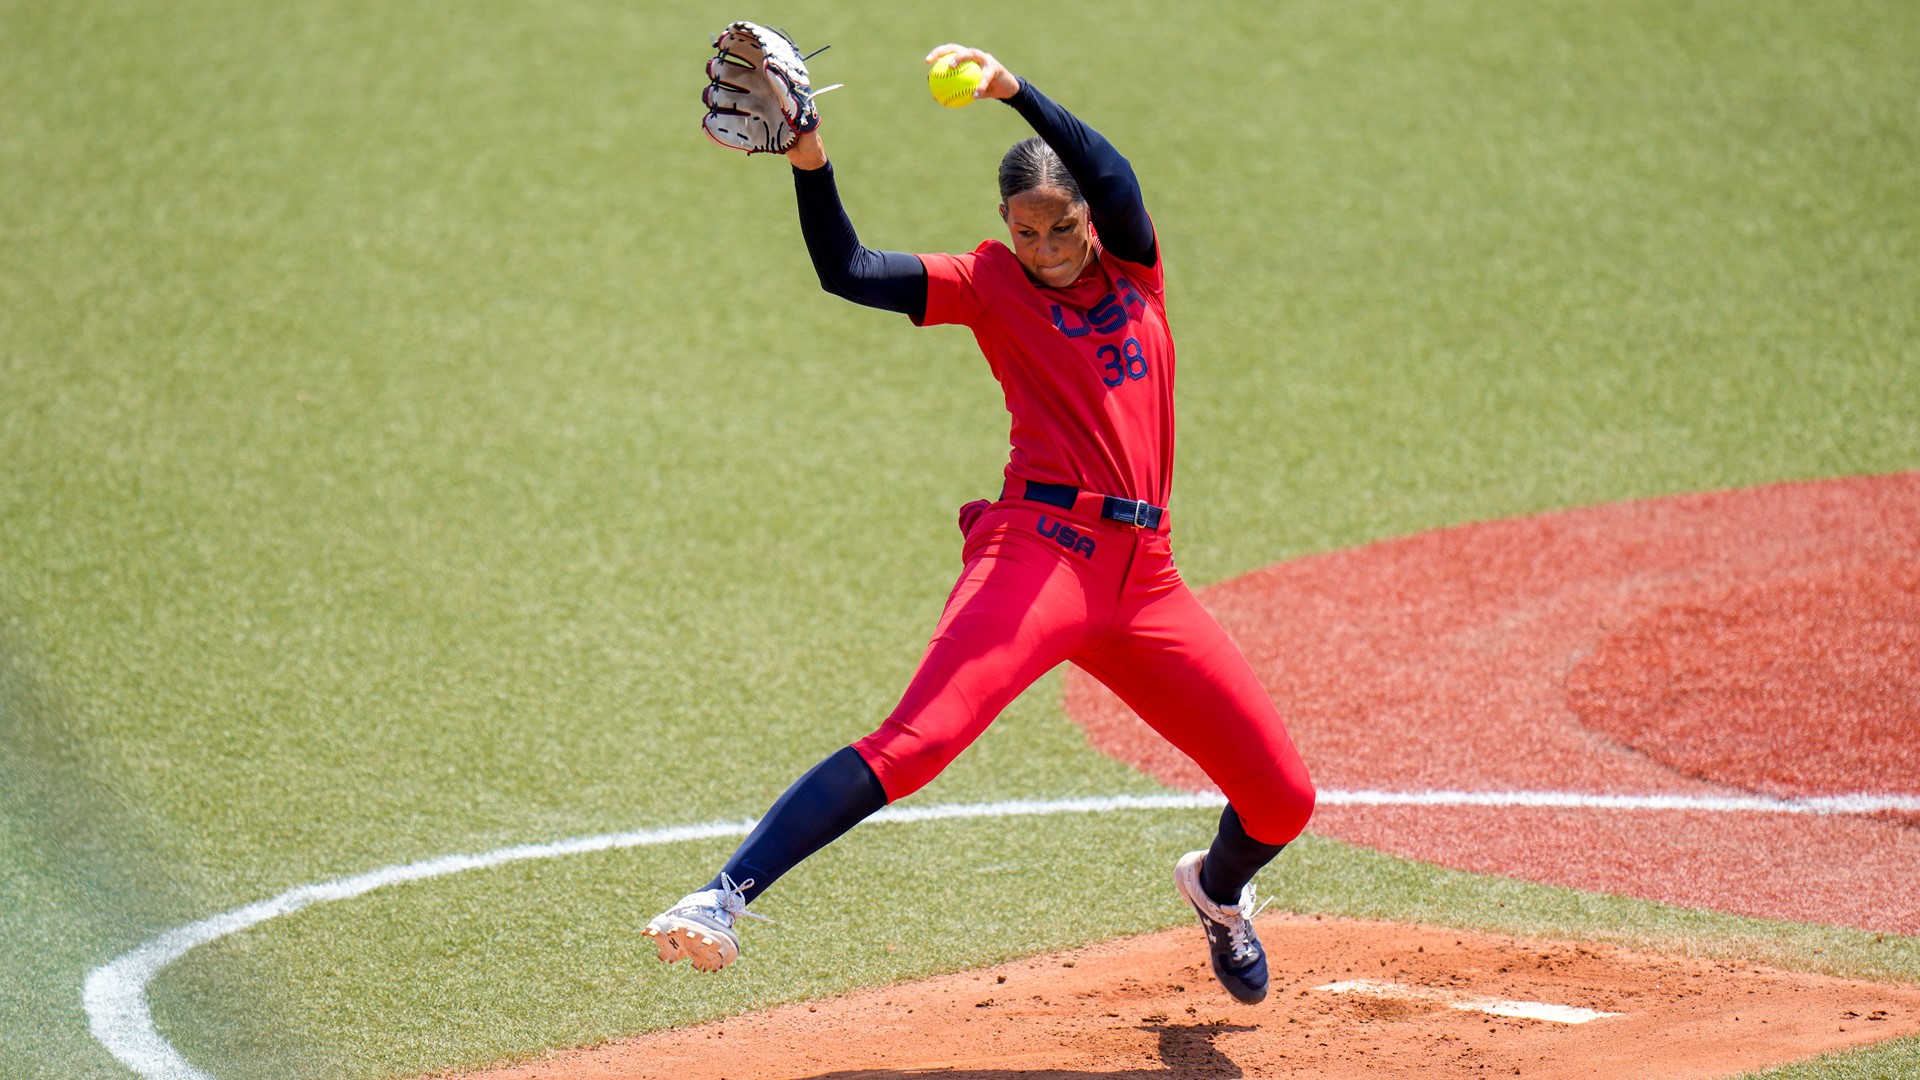 Cat Osterman, the last remaining player from the 2004 U.S. gold medalists, dominated on the mound on in a 2-0 win.